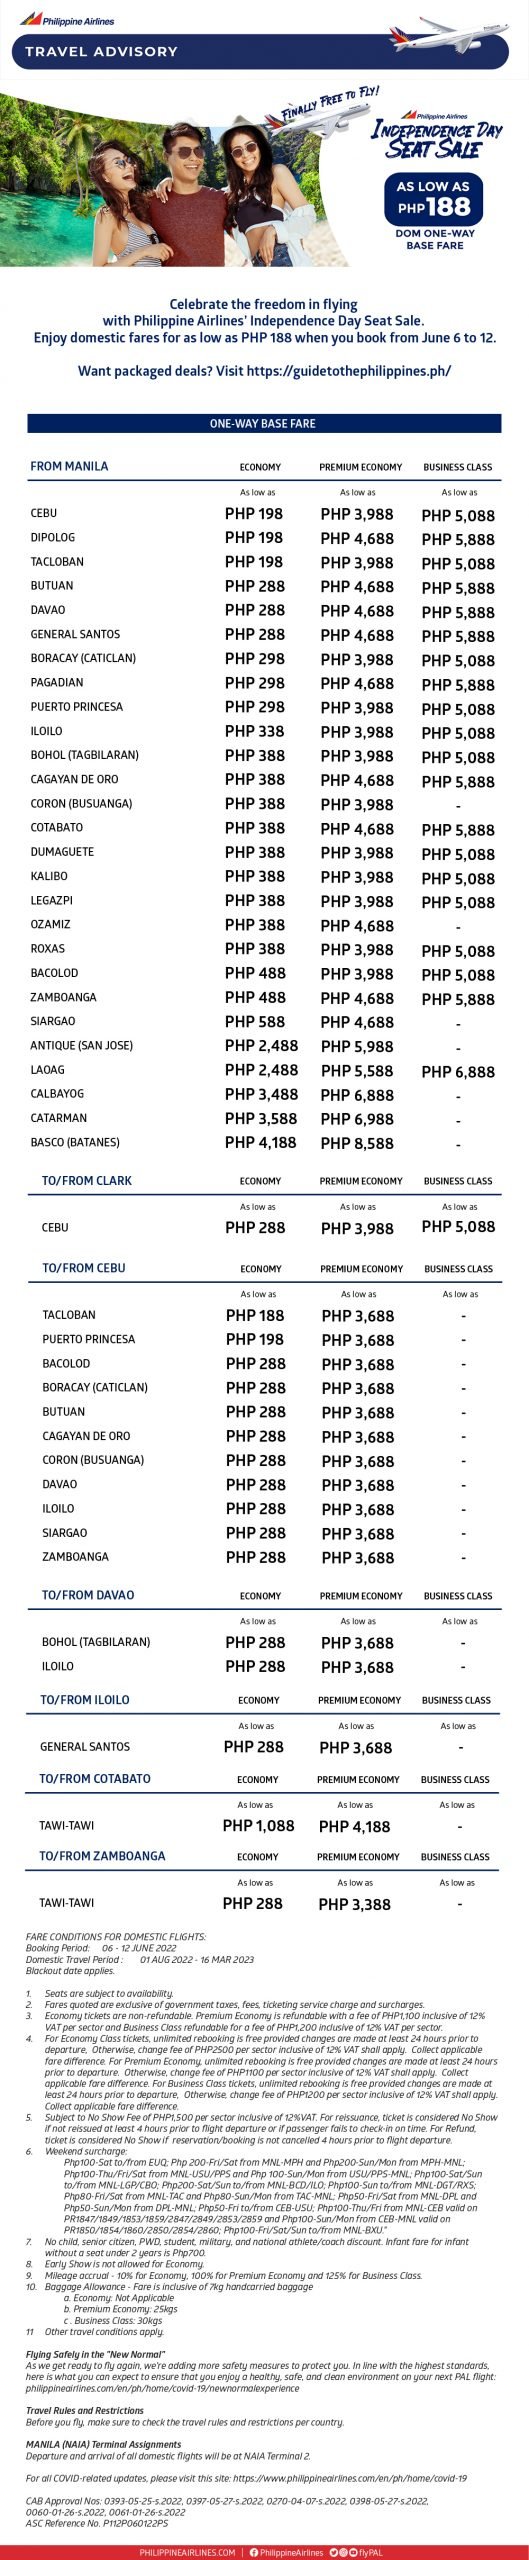 PAL Independence Seat Sale